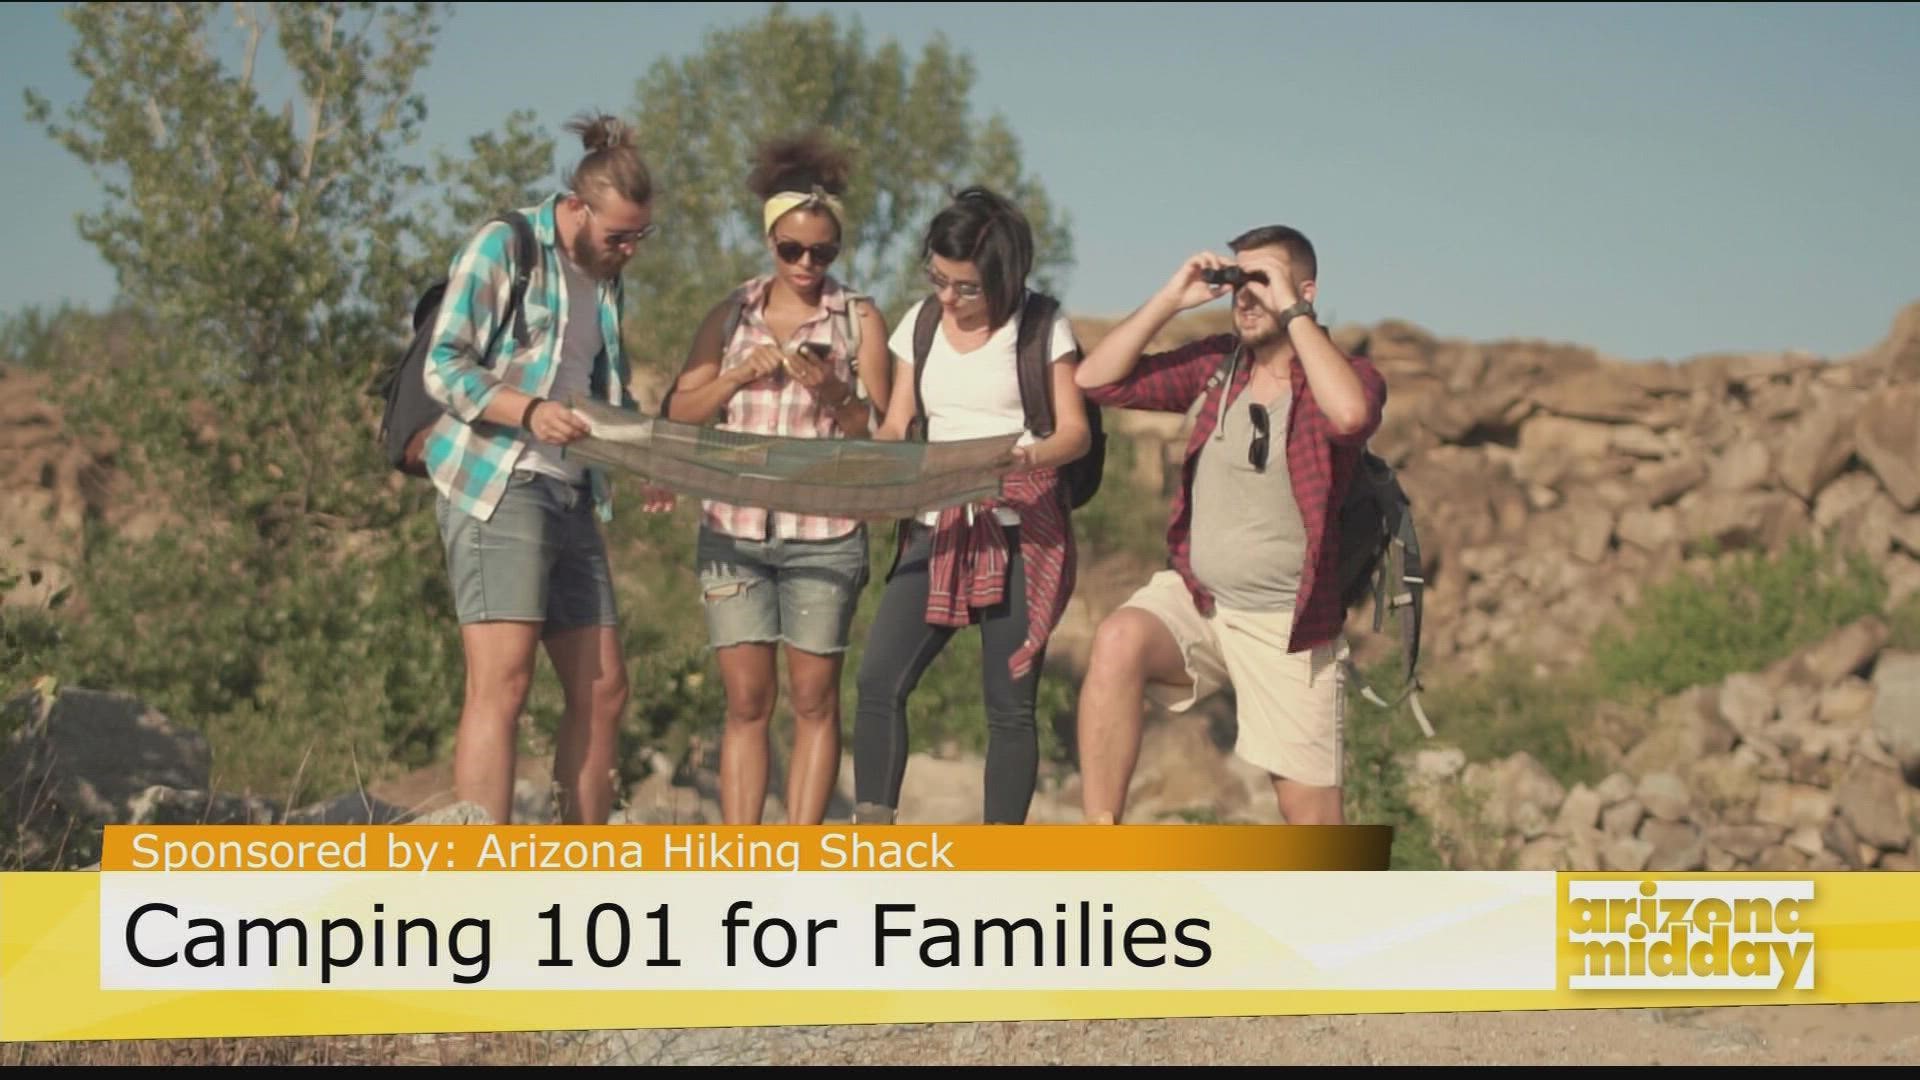 Jonathan Mincks, Wilderness Skills Instructor From Arizona Hiking Shack, shares his top tips for families to get outside and stay safe